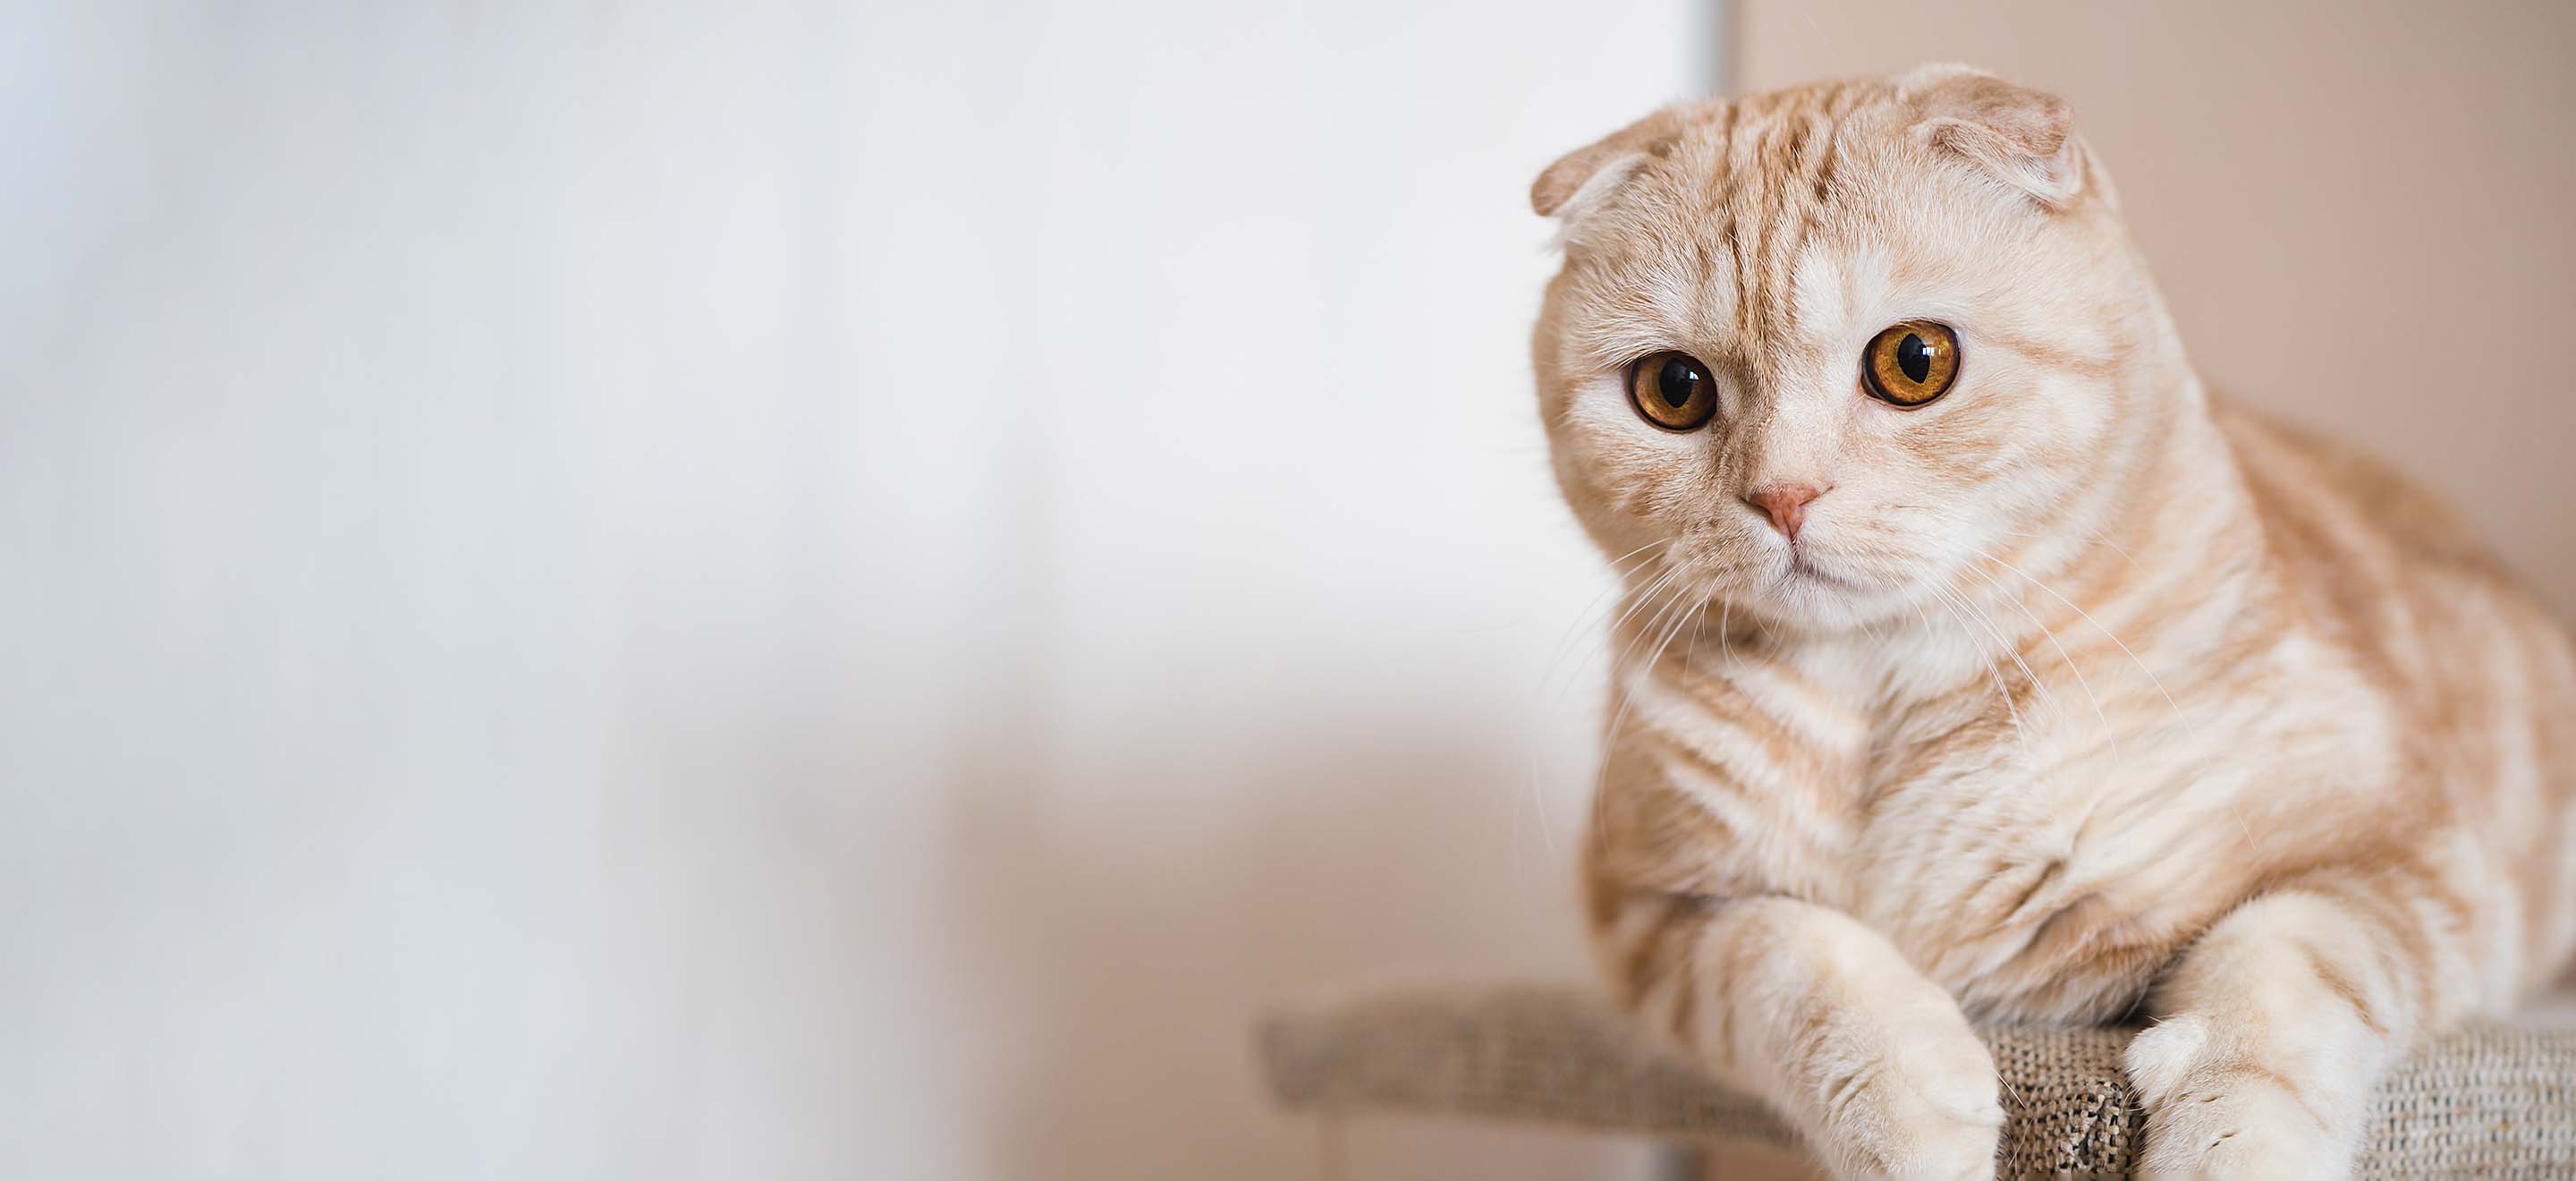 Tan Scottish fold cat with tiny folded ears sitting on a beige cat tree and looking at the camera image